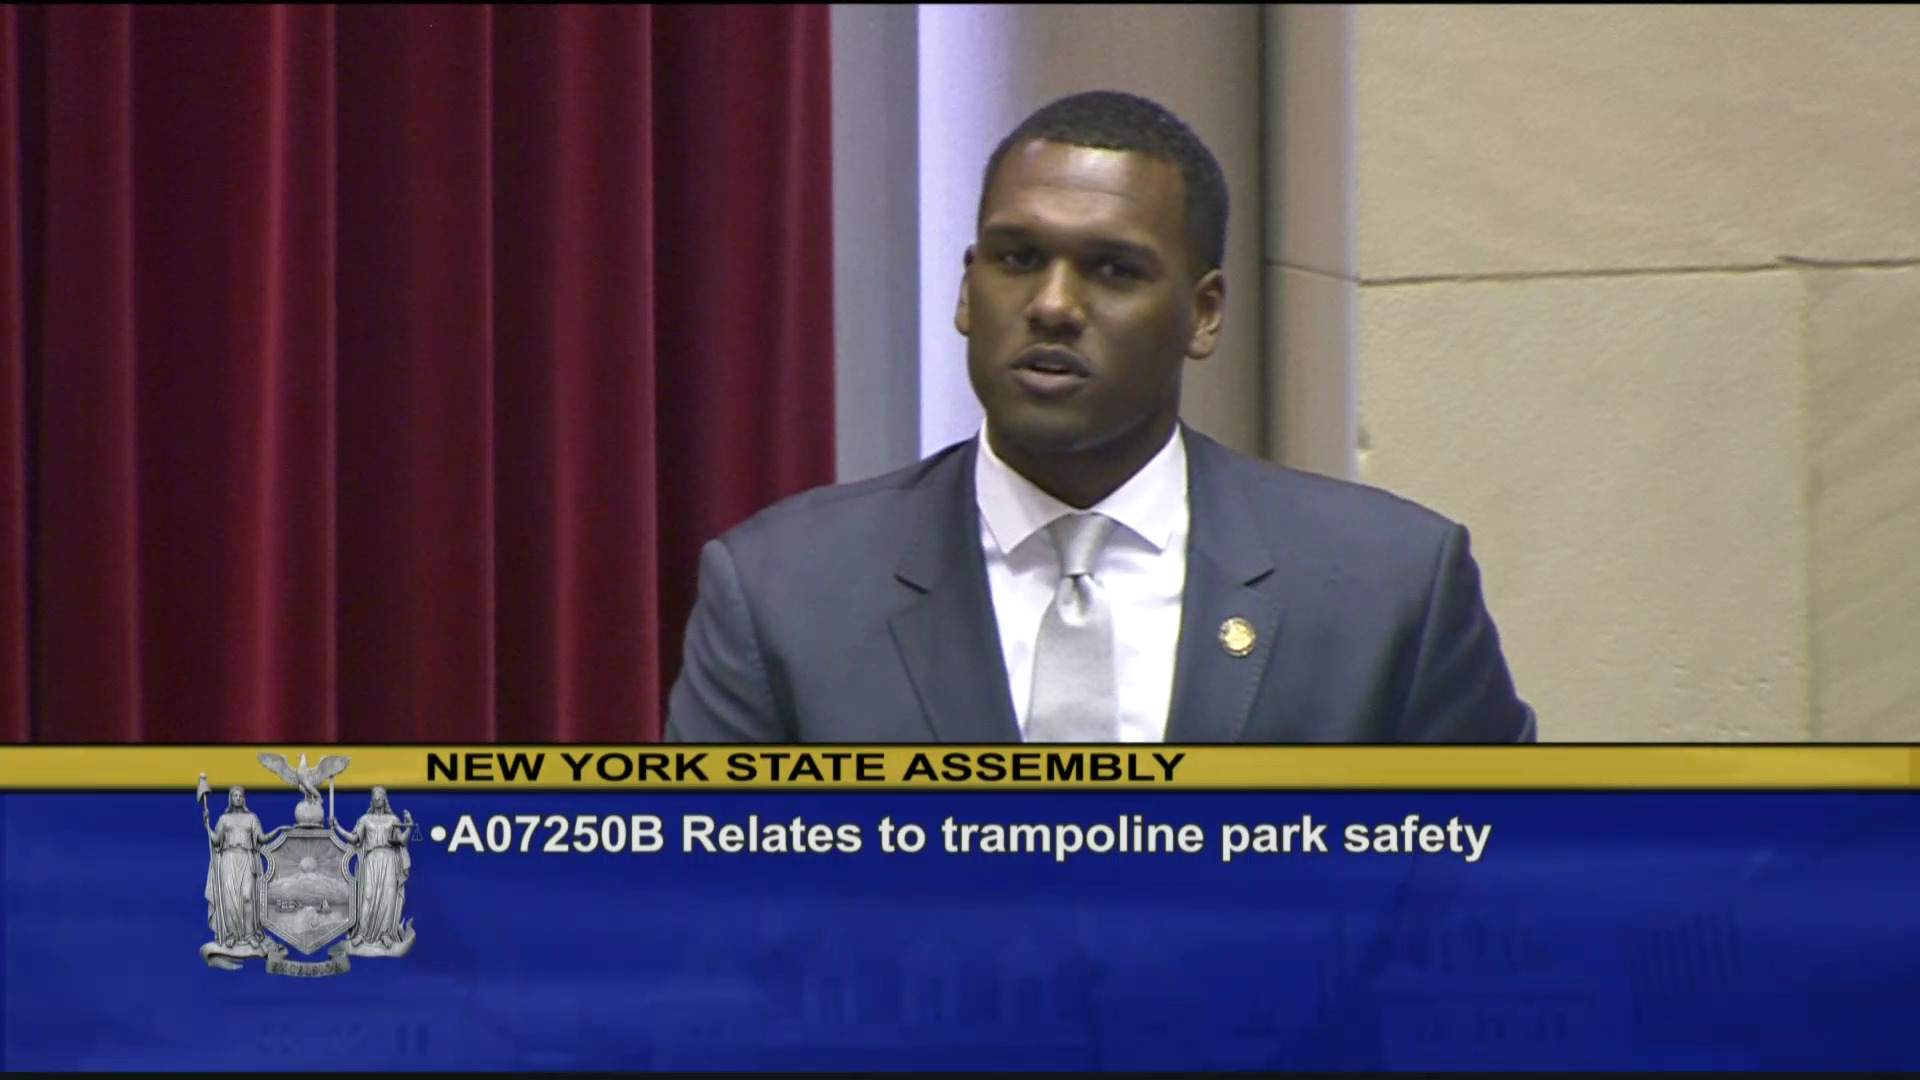 Trampoline Safety Bill Passes in the Assembly